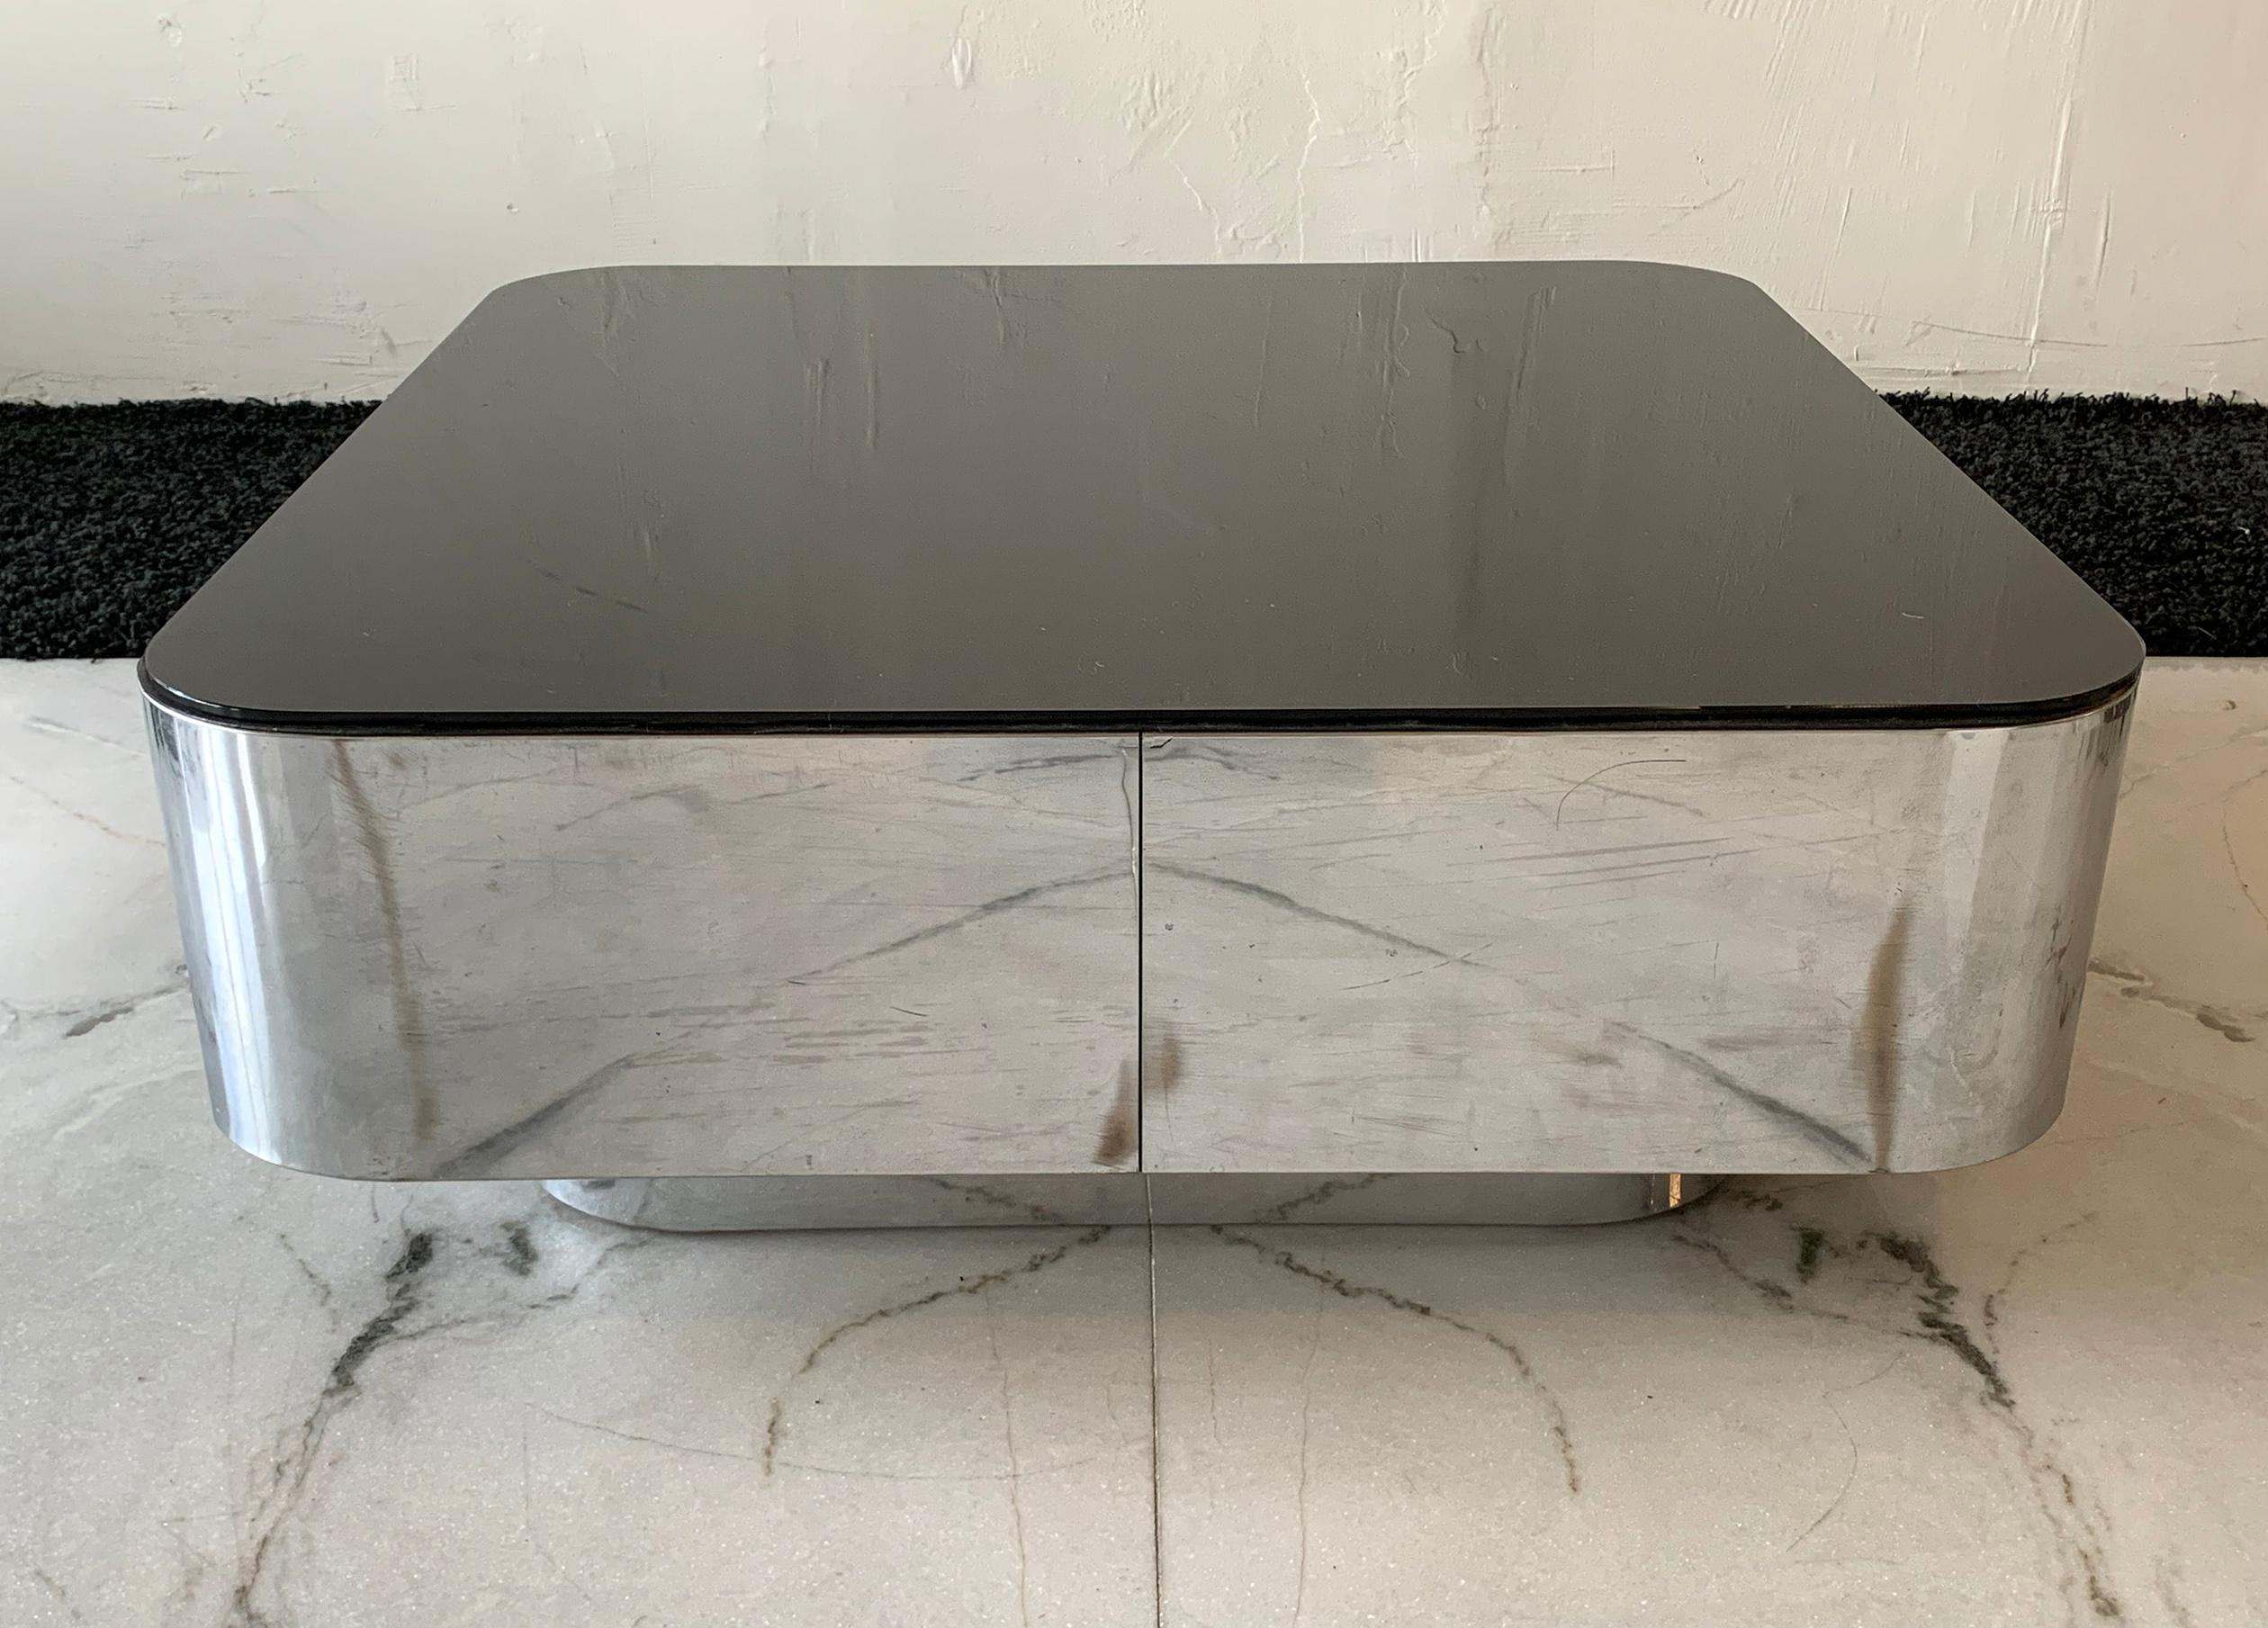 Polished M.F. Harty for Stow Davis Chrome and Glass Coffee Table